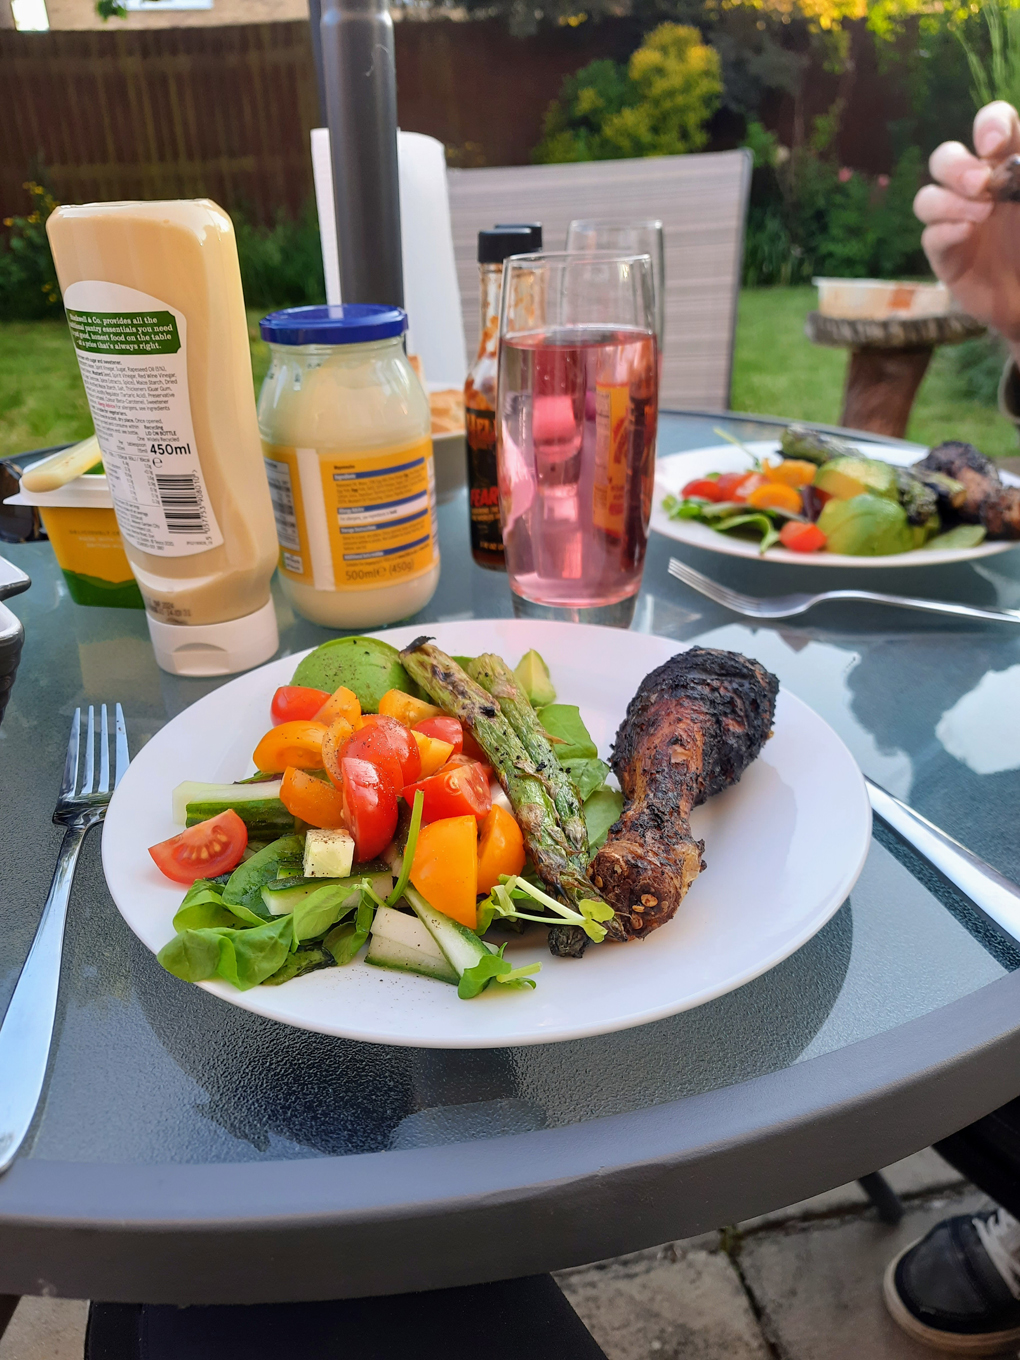 Picture taken outdoors on a sunny day, a plate of fresh salad, and roasted veg and chicken is surrounded by a cool glass of water and condiments.